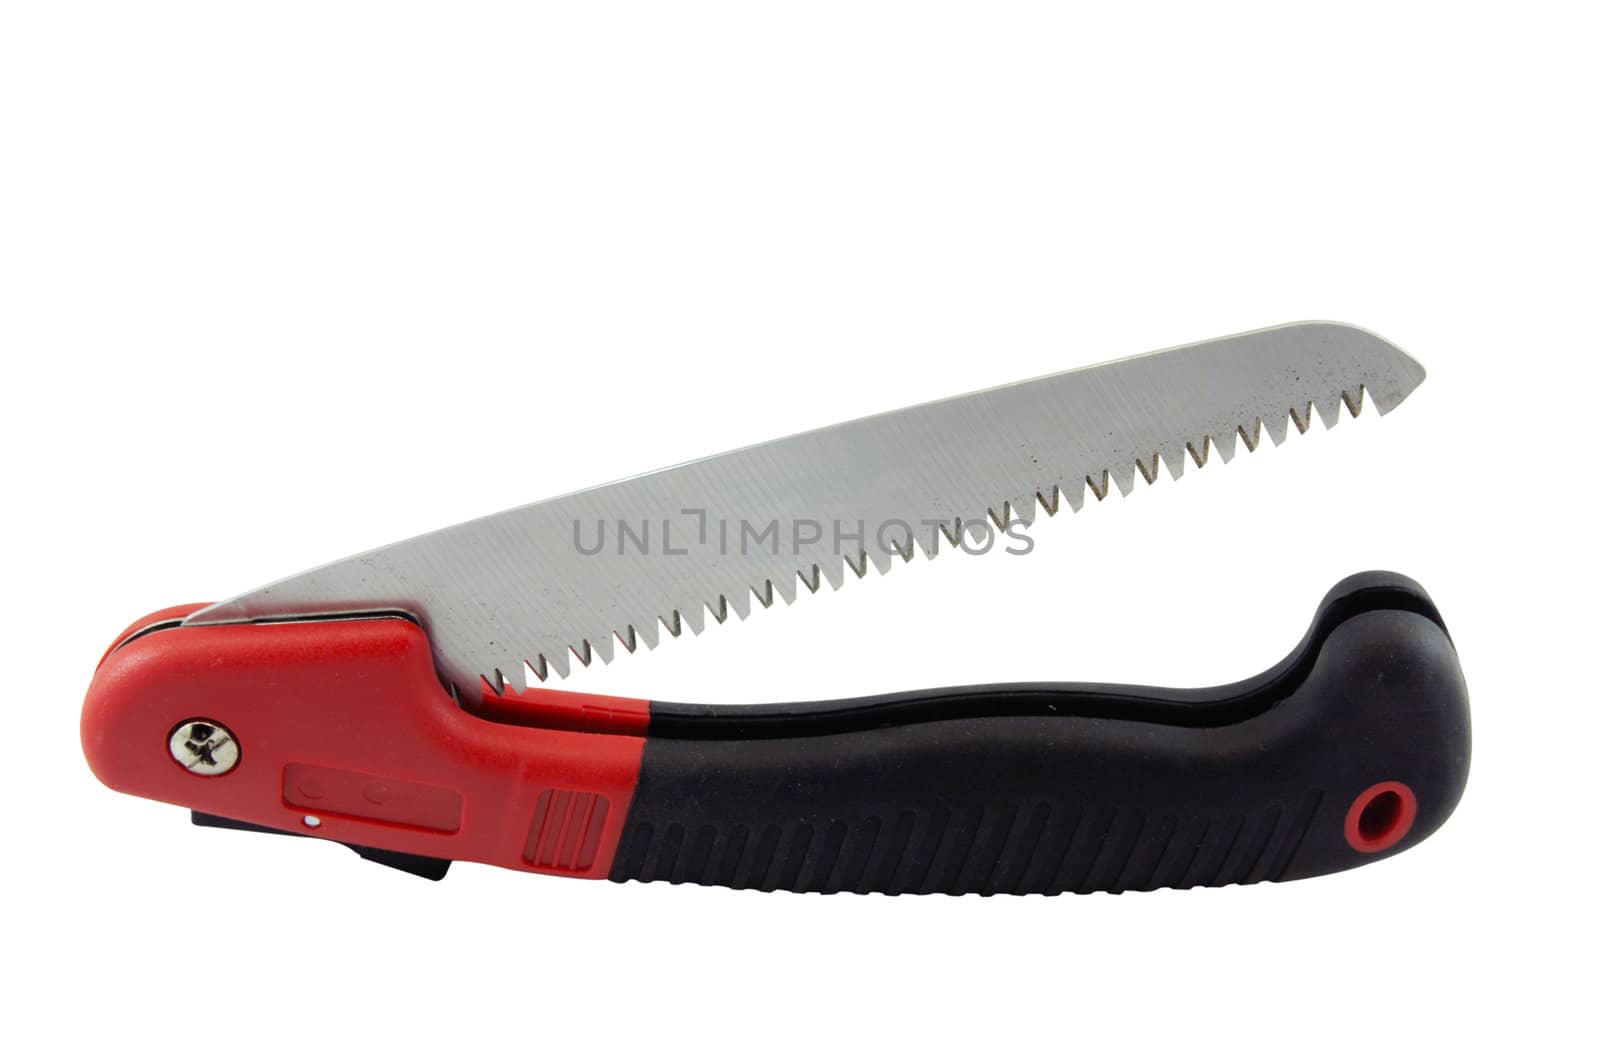 Collapsible saw by Dominator